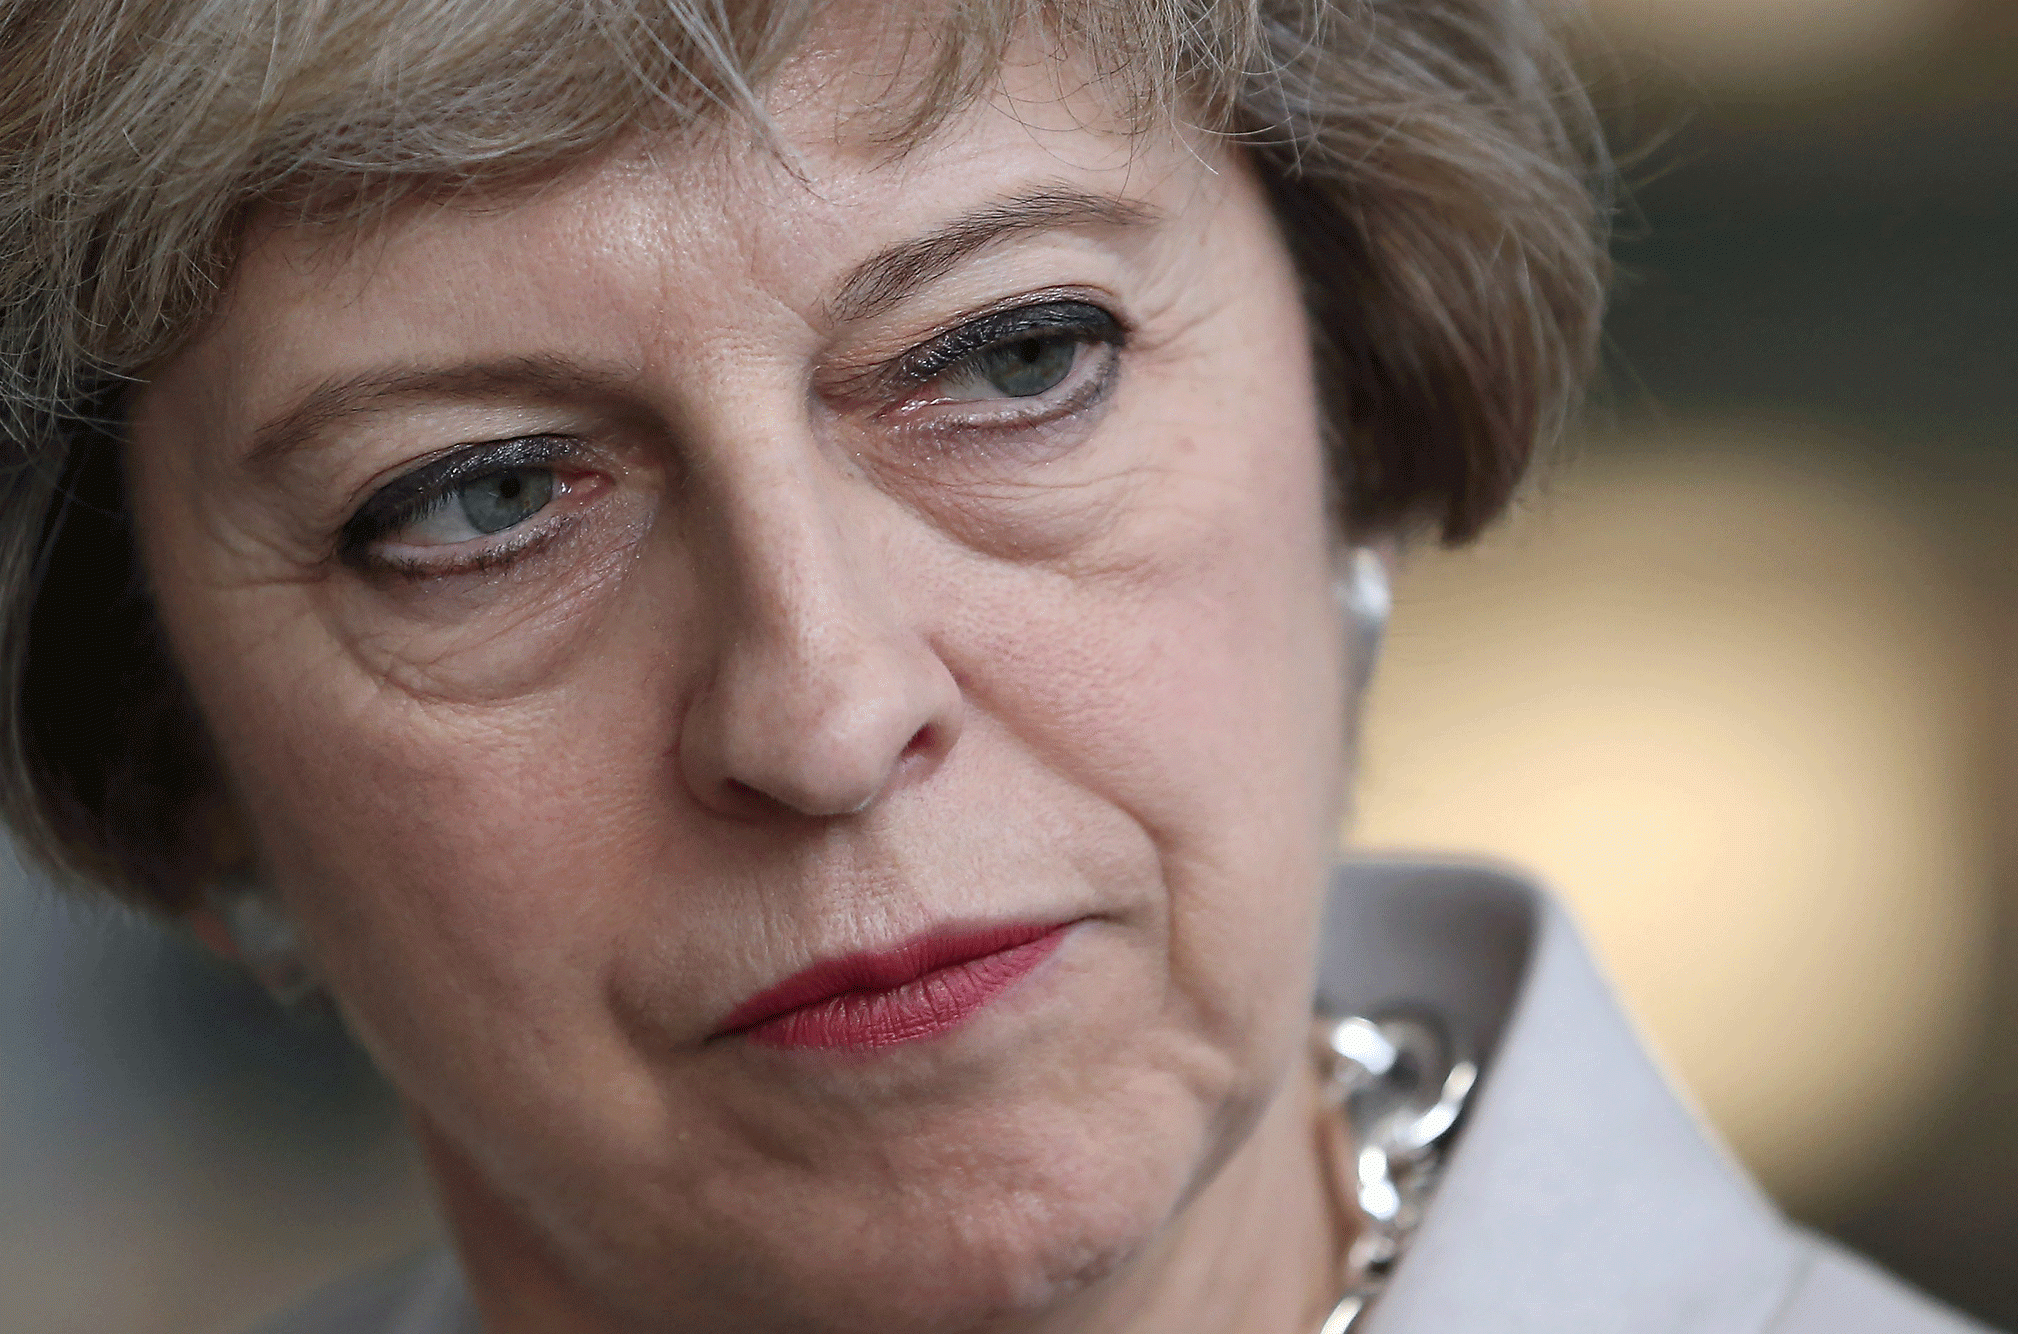 Theresa May has promised to make the UK 'work for everyone, not just a privileged few'